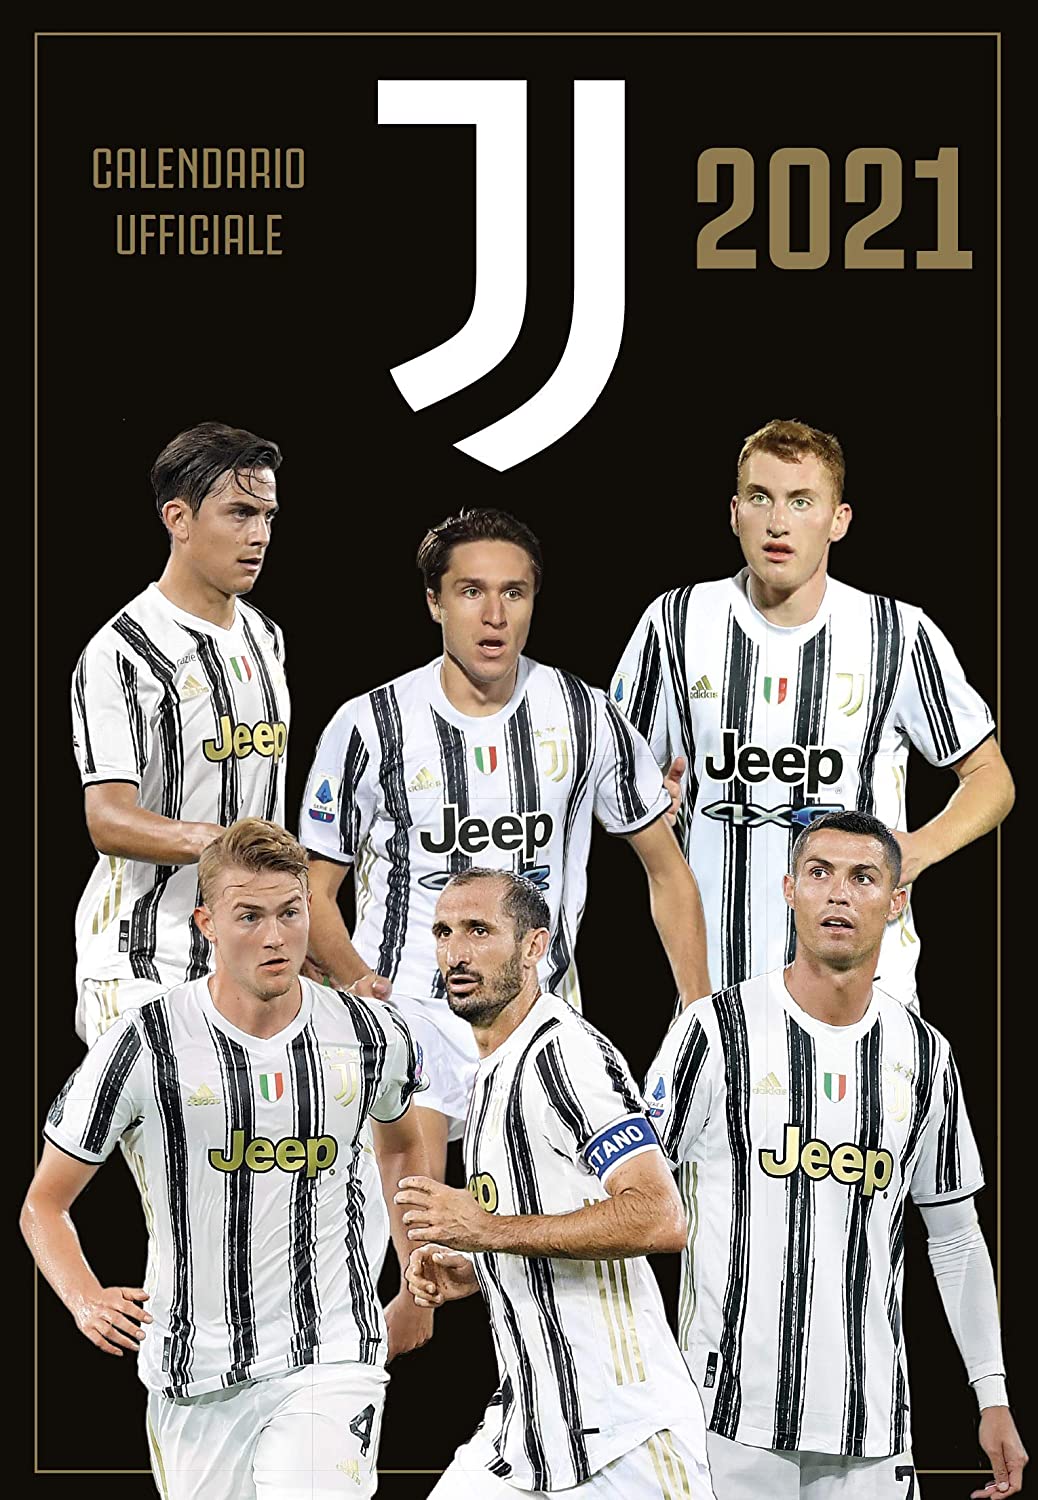 Football Stationery Calendars/Diaries Juventus 2021 Official